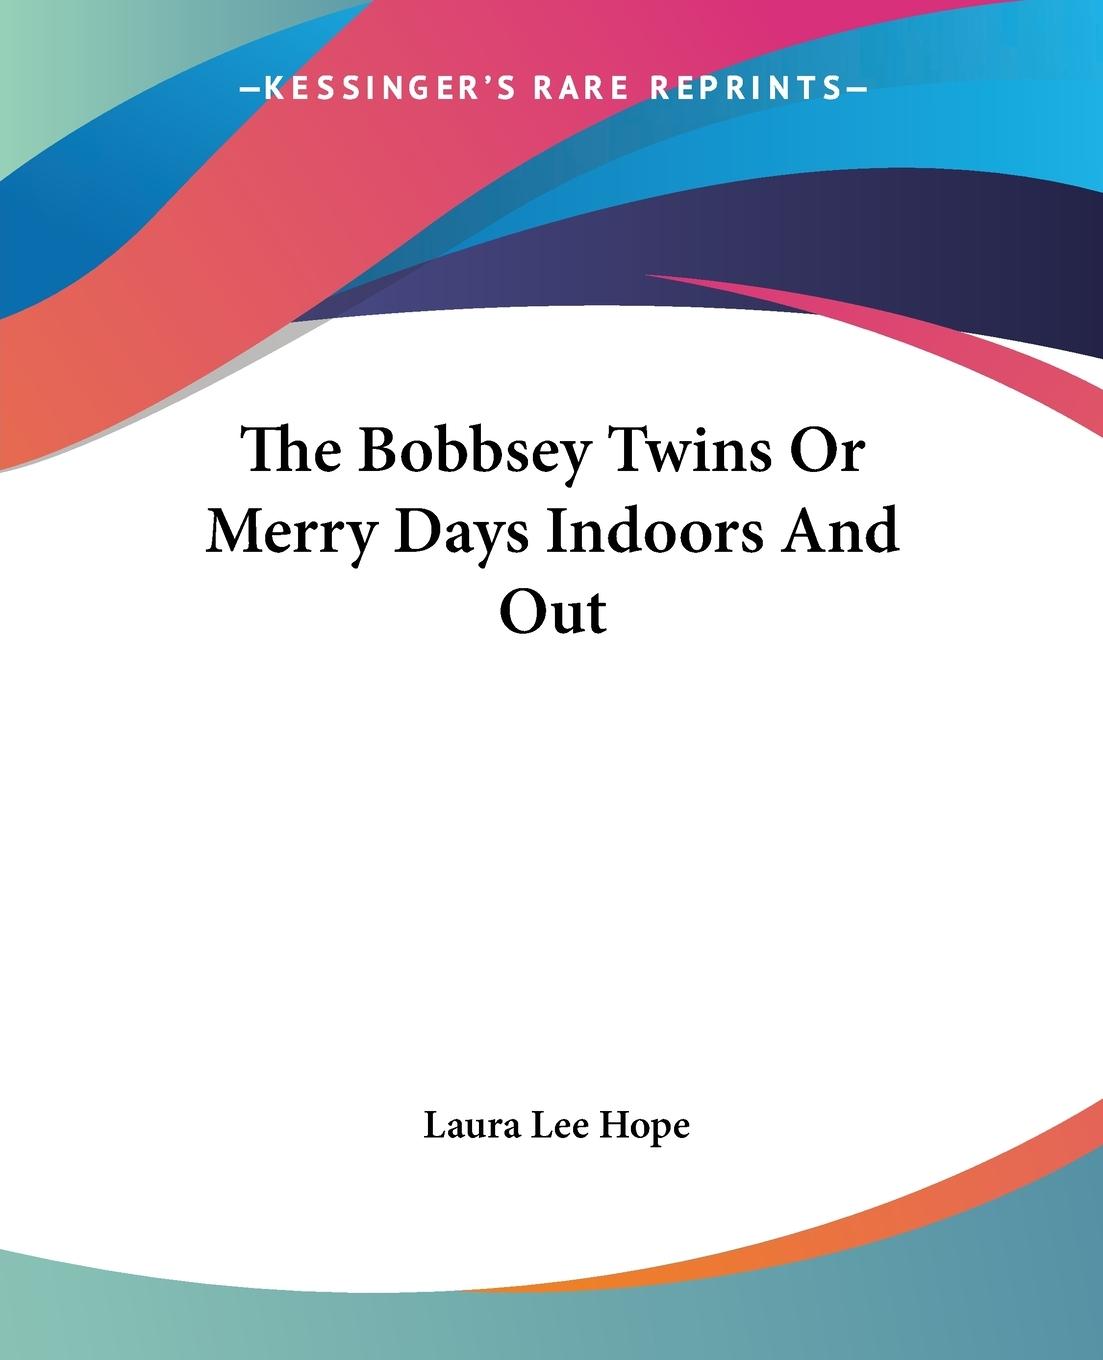 The Bobbsey Twins Or Merry Days Indoors And Out - Hope, Laura Lee